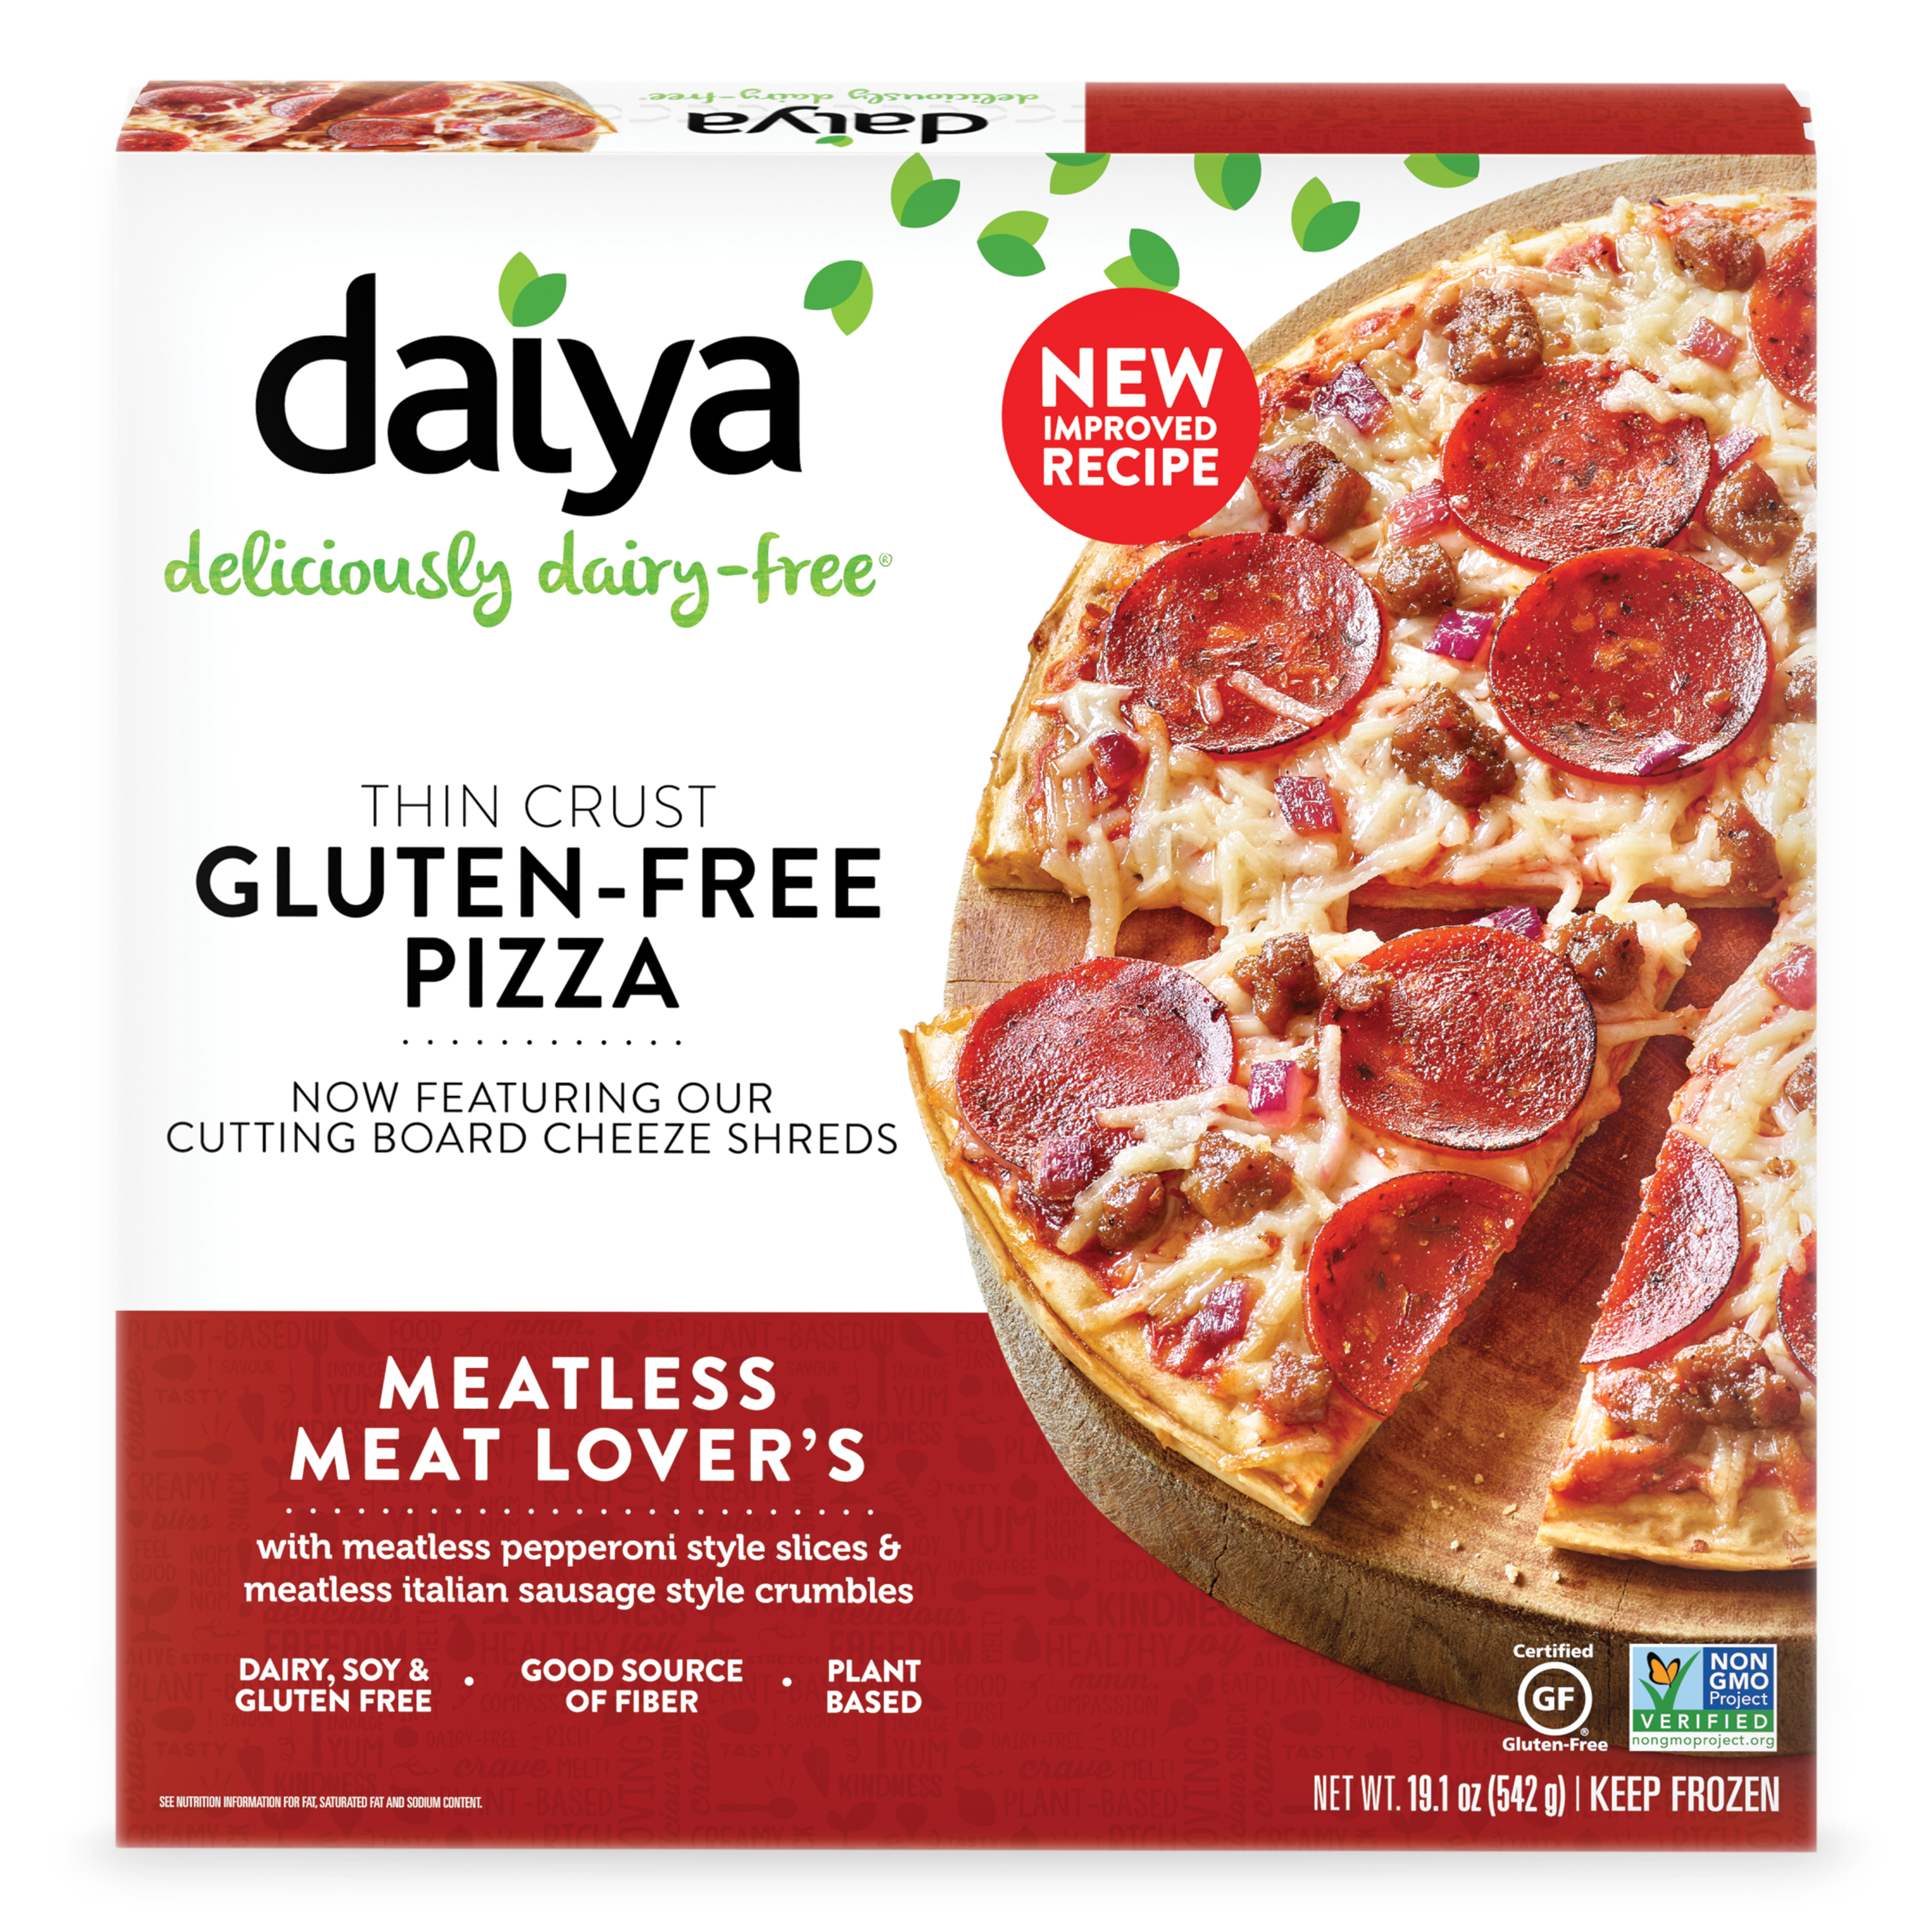 Meatless Meat Lover's Pizza